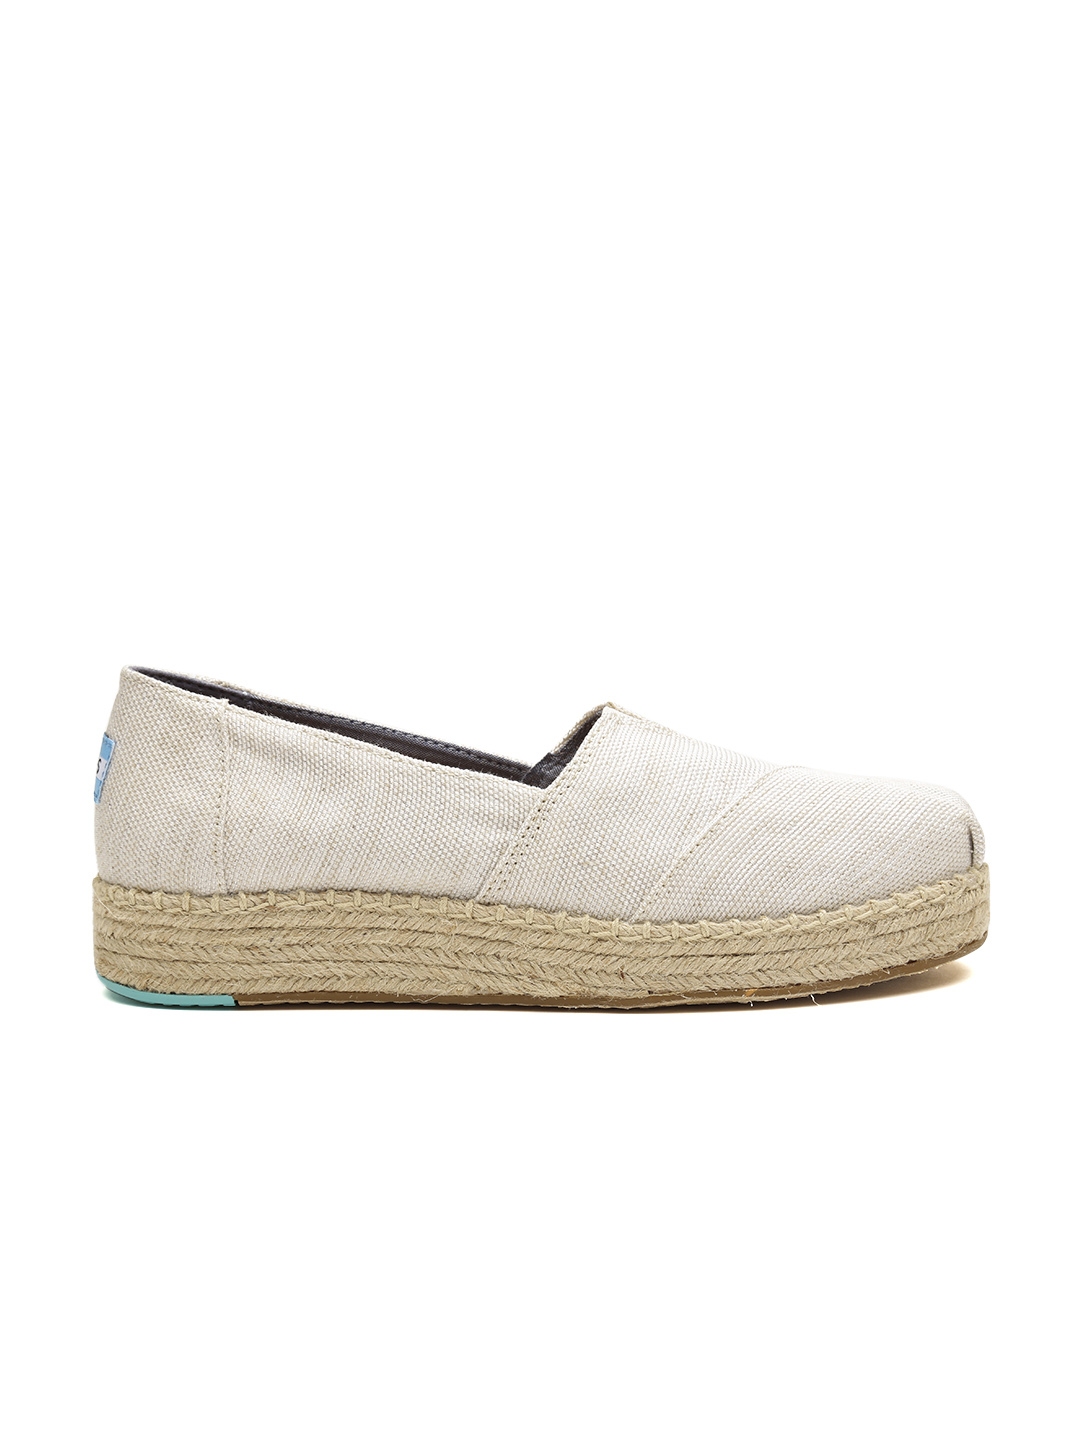 Buy TOMS Women Off White Espadrilles - Casual Shoes for Women 1900532 ...